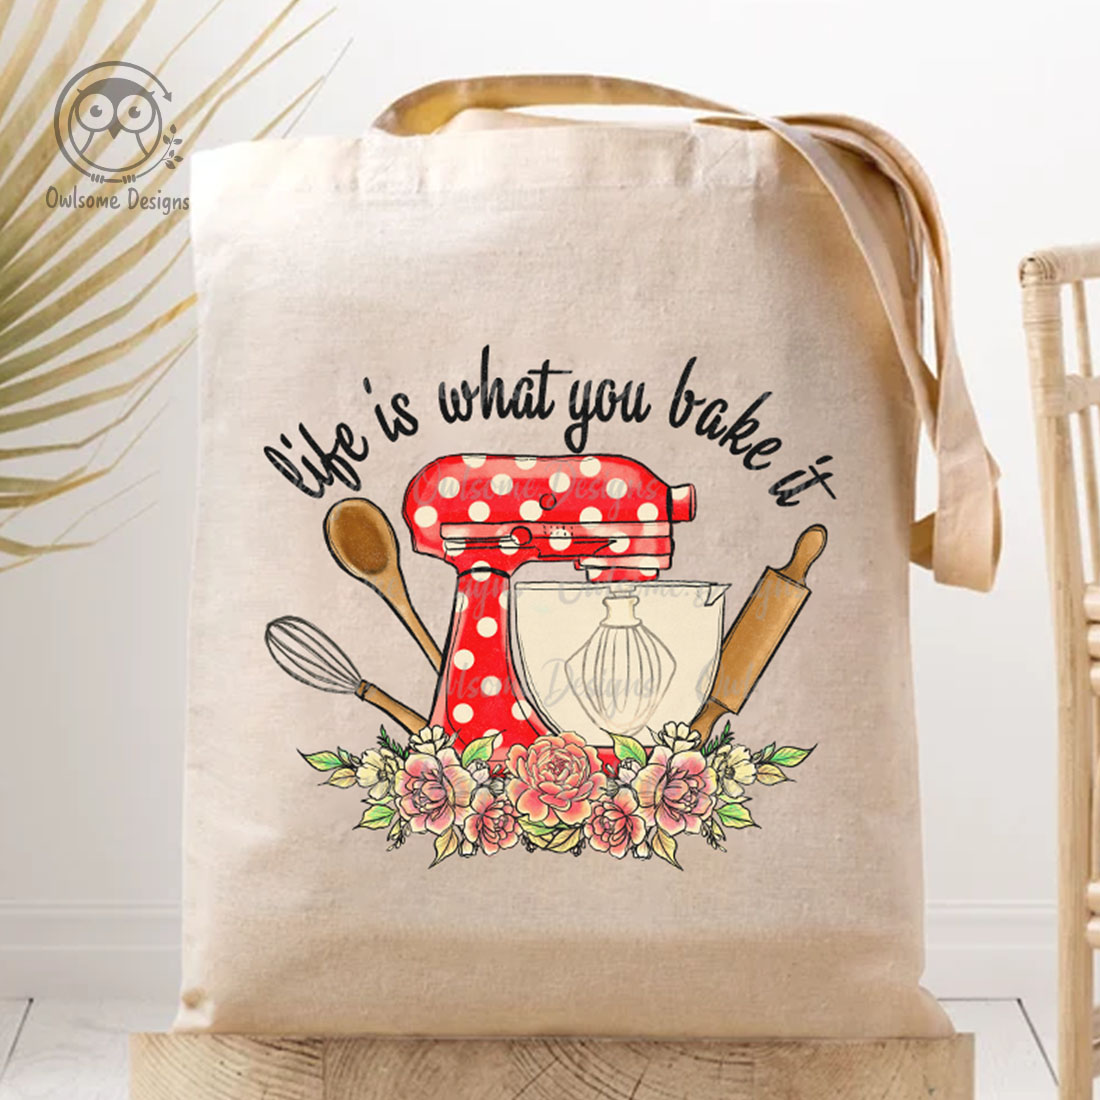 Picture of bag with wonderful print with food processor for baking.